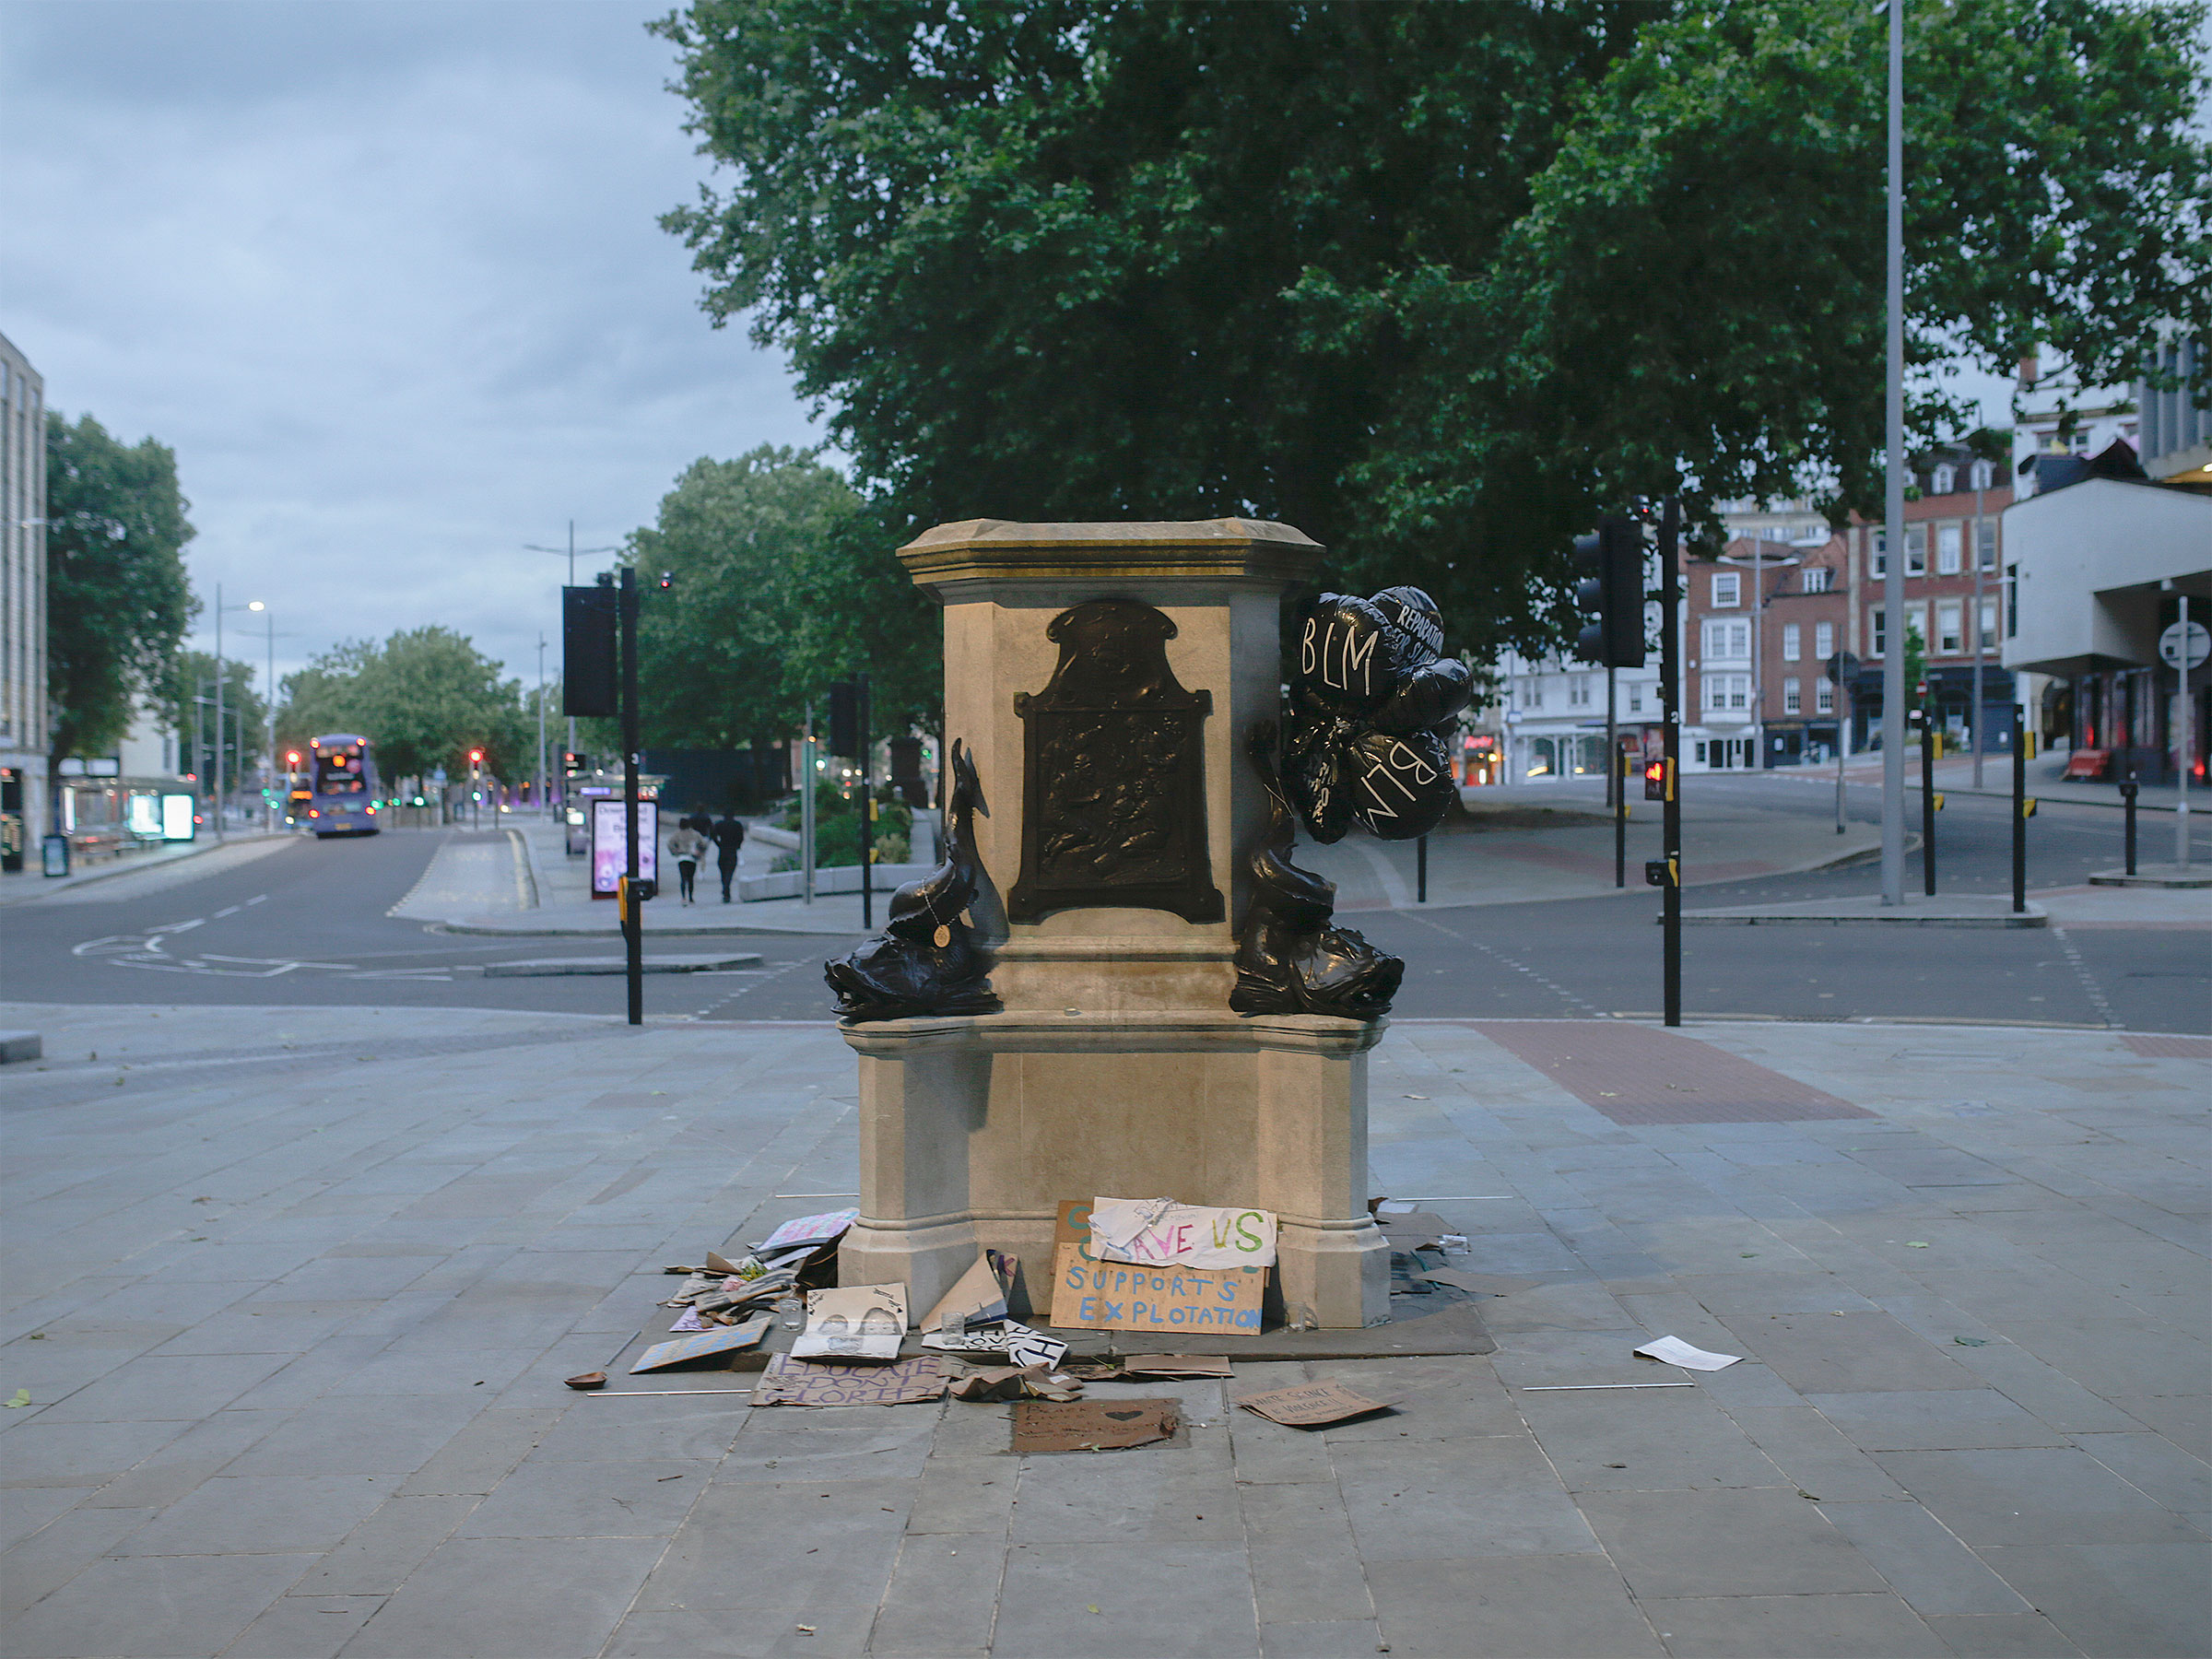 The plinth of the statue of Edward Colston in Bristol, England, is now surrounded by messages of support for the Black Lives Matter movement, June 11, 2020. (James Beck/The New York Times)